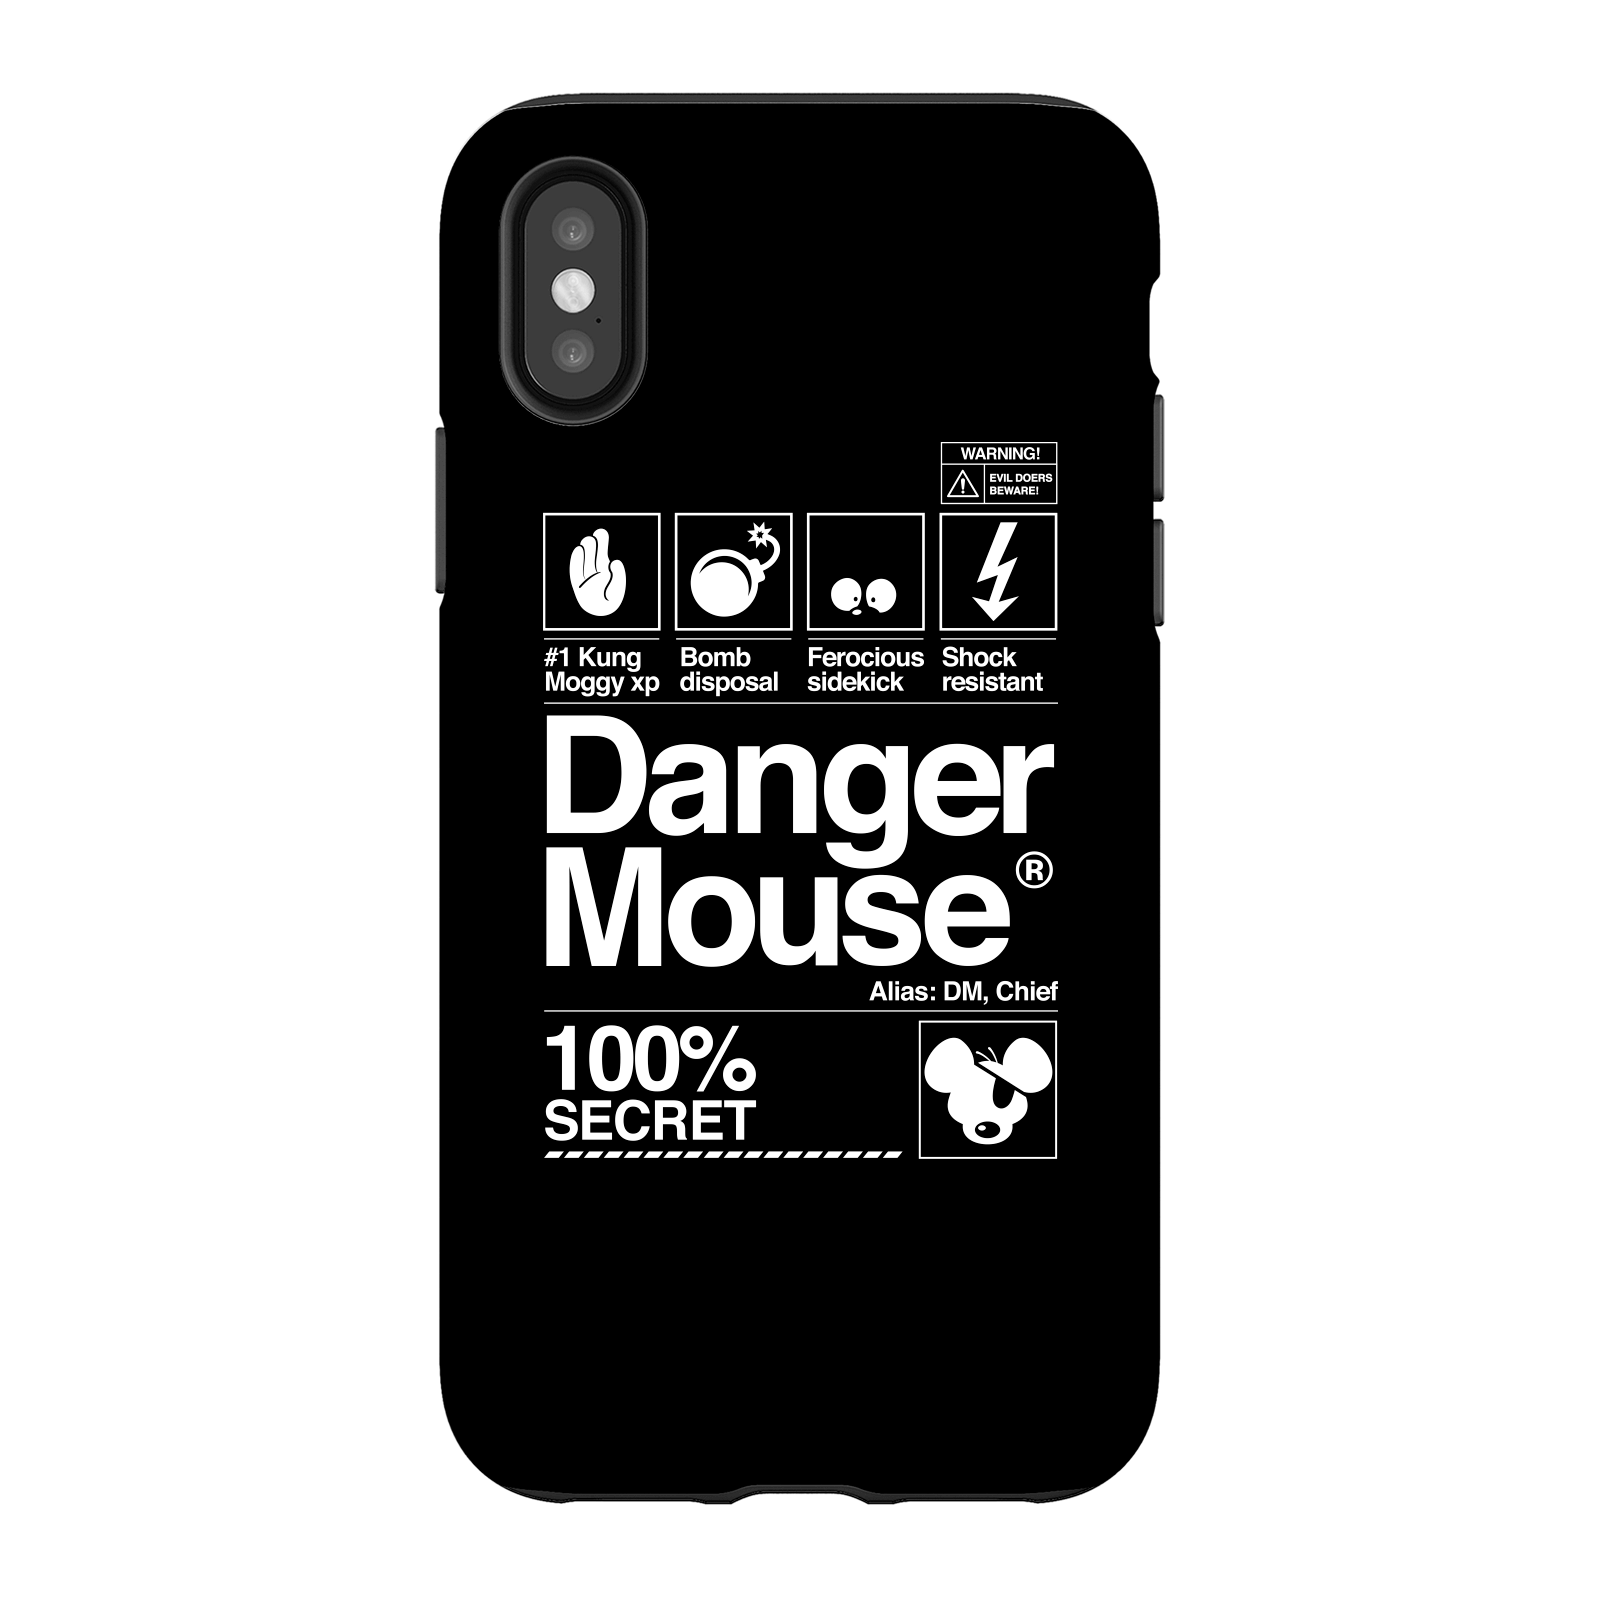 Danger Mouse 100% Secret Phone Case for iPhone and Android - iPhone X - Tough Case - Matte